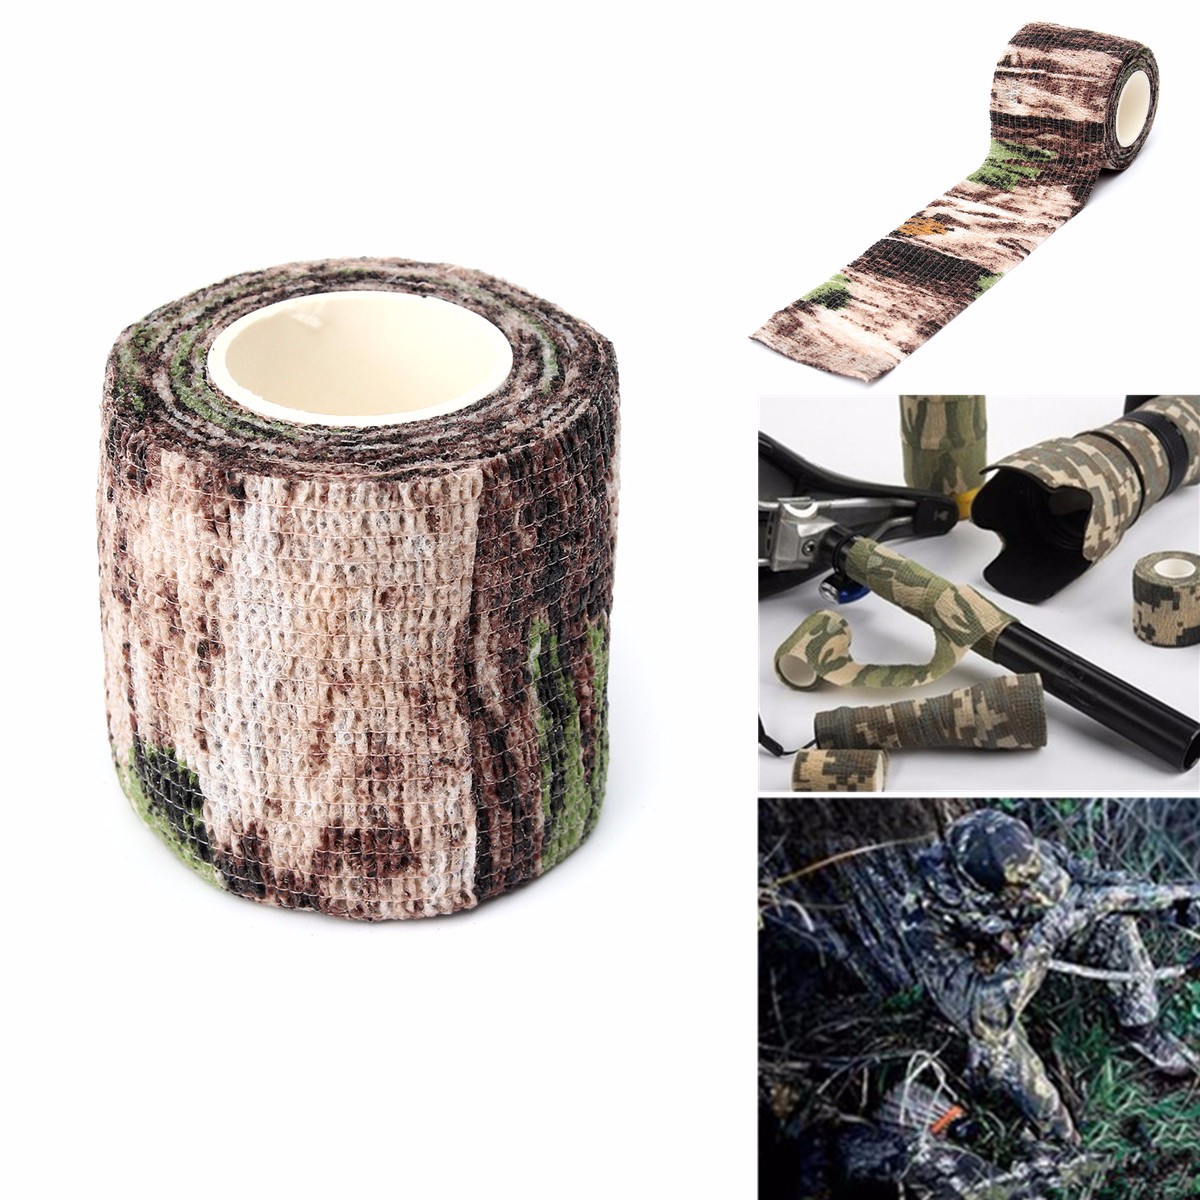 5CM-X-45-Military-Camouflage-Camo-Tape-Stealth-Wrap-Hunting-Camping-Waterproof-1135413